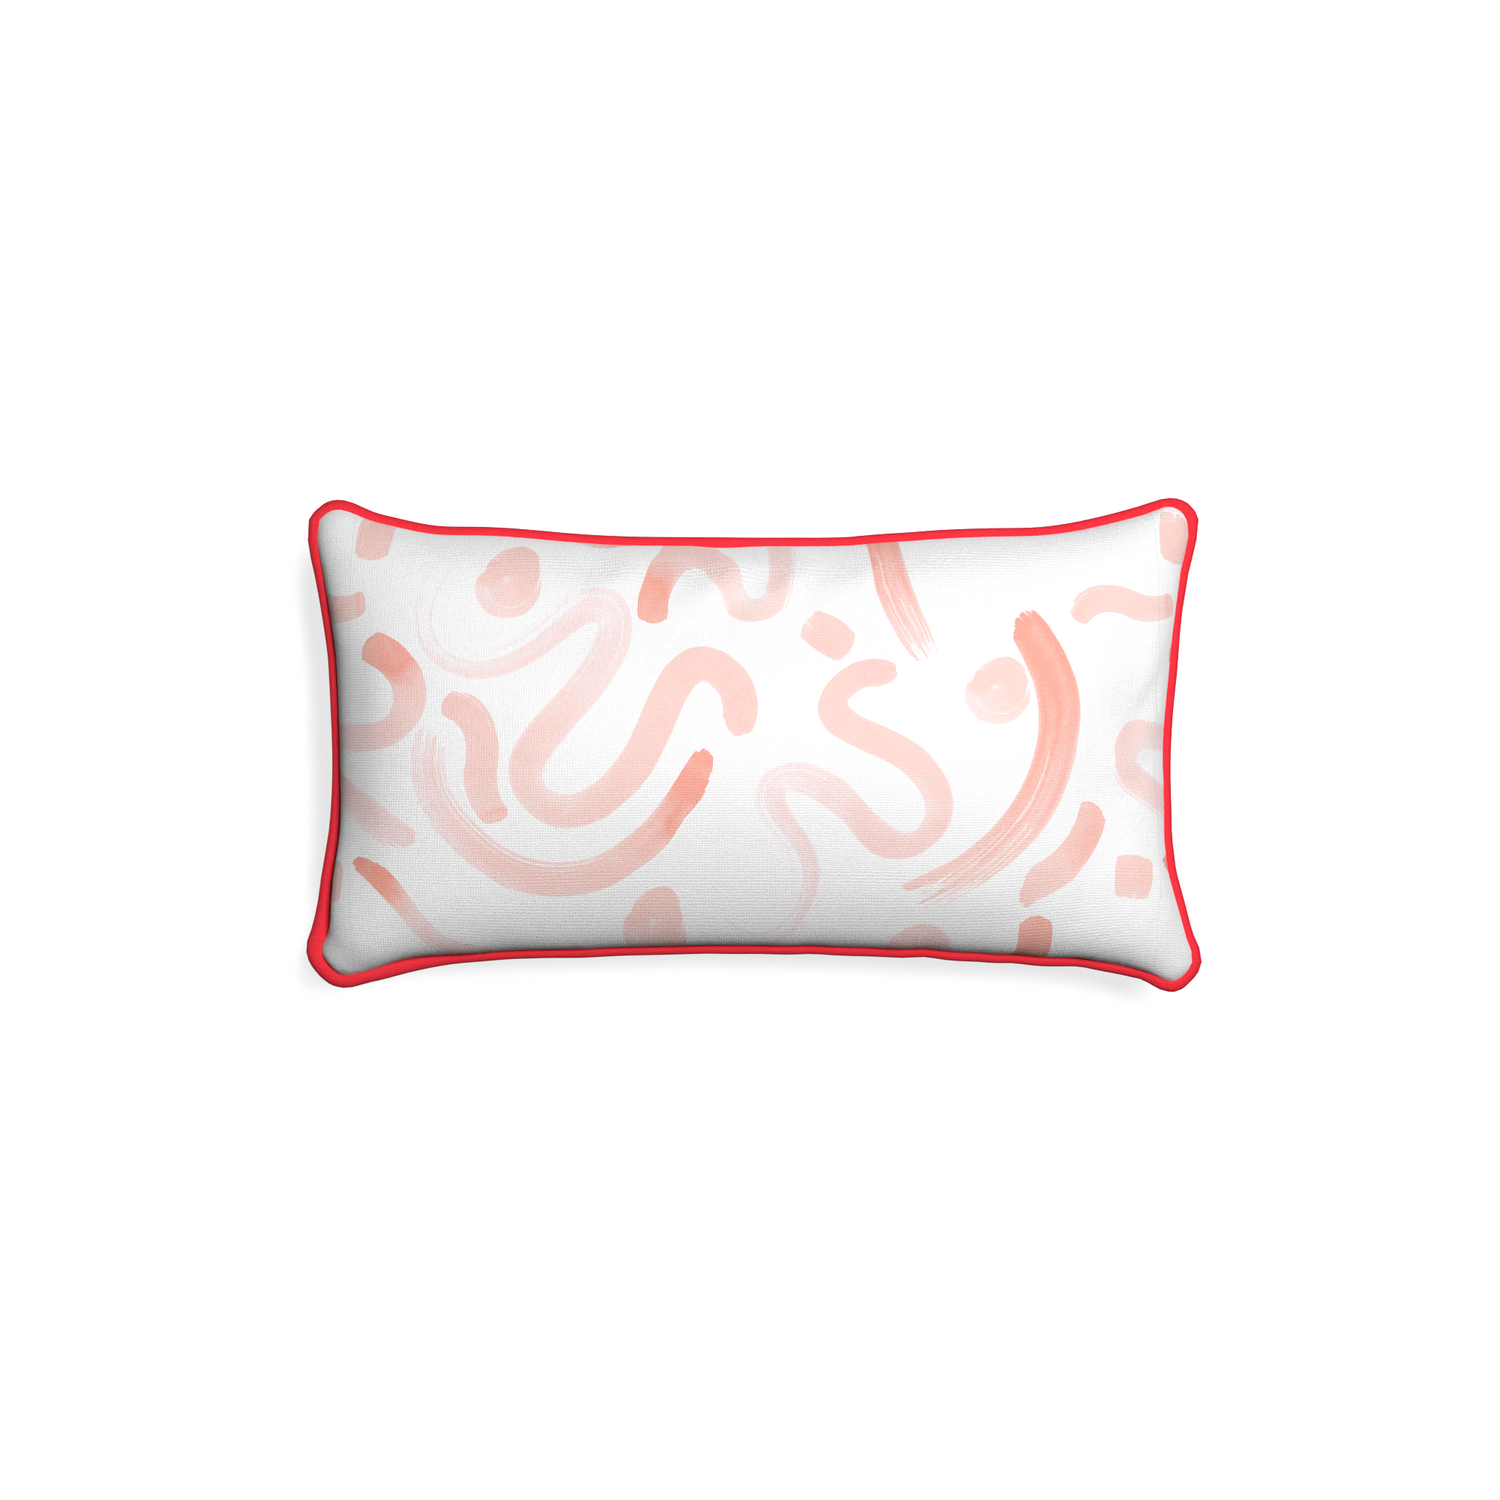 Petite-lumbar hockney pink custom pink graphicpillow with cherry piping on white background